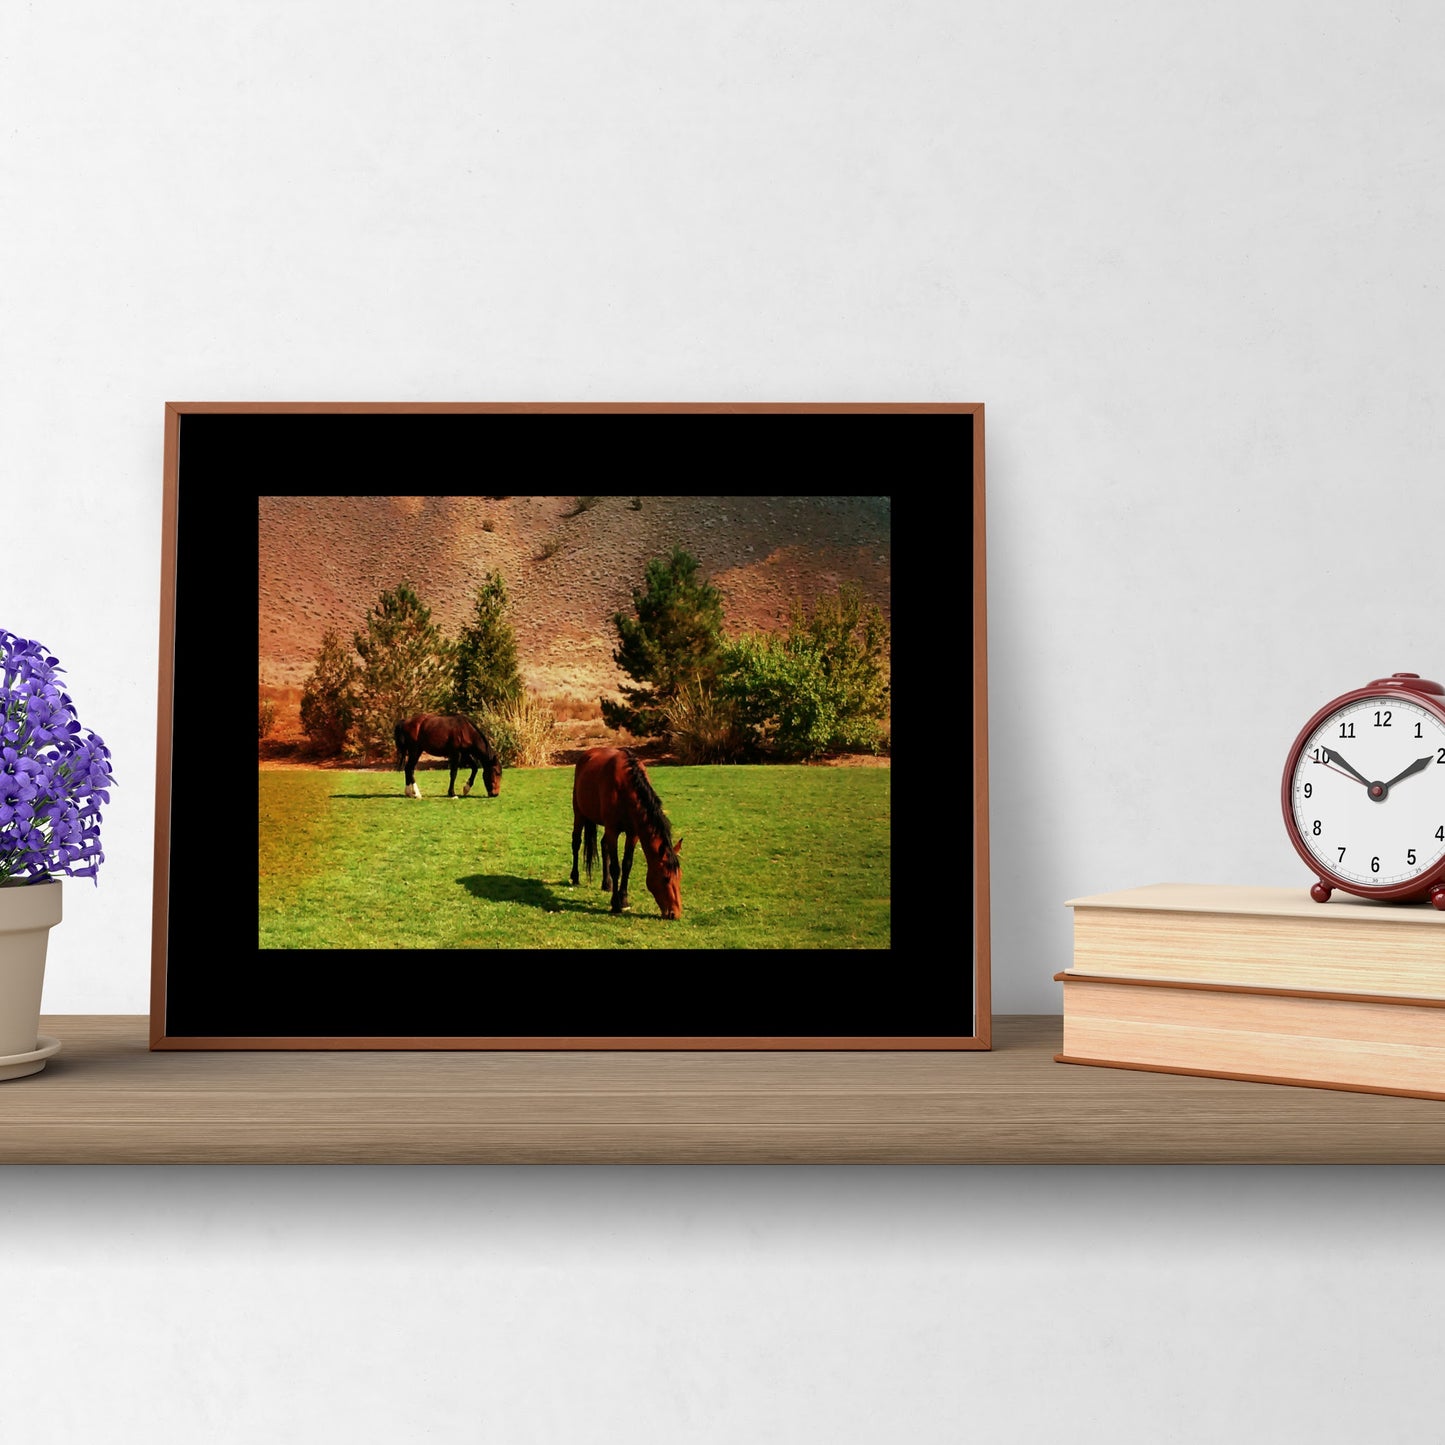 Mock up of Brown Mustang Horses: Wall Decor by PonsArt $34.95 - PAMELA'S ART by PonsART - a Gift Shop and Marketplace